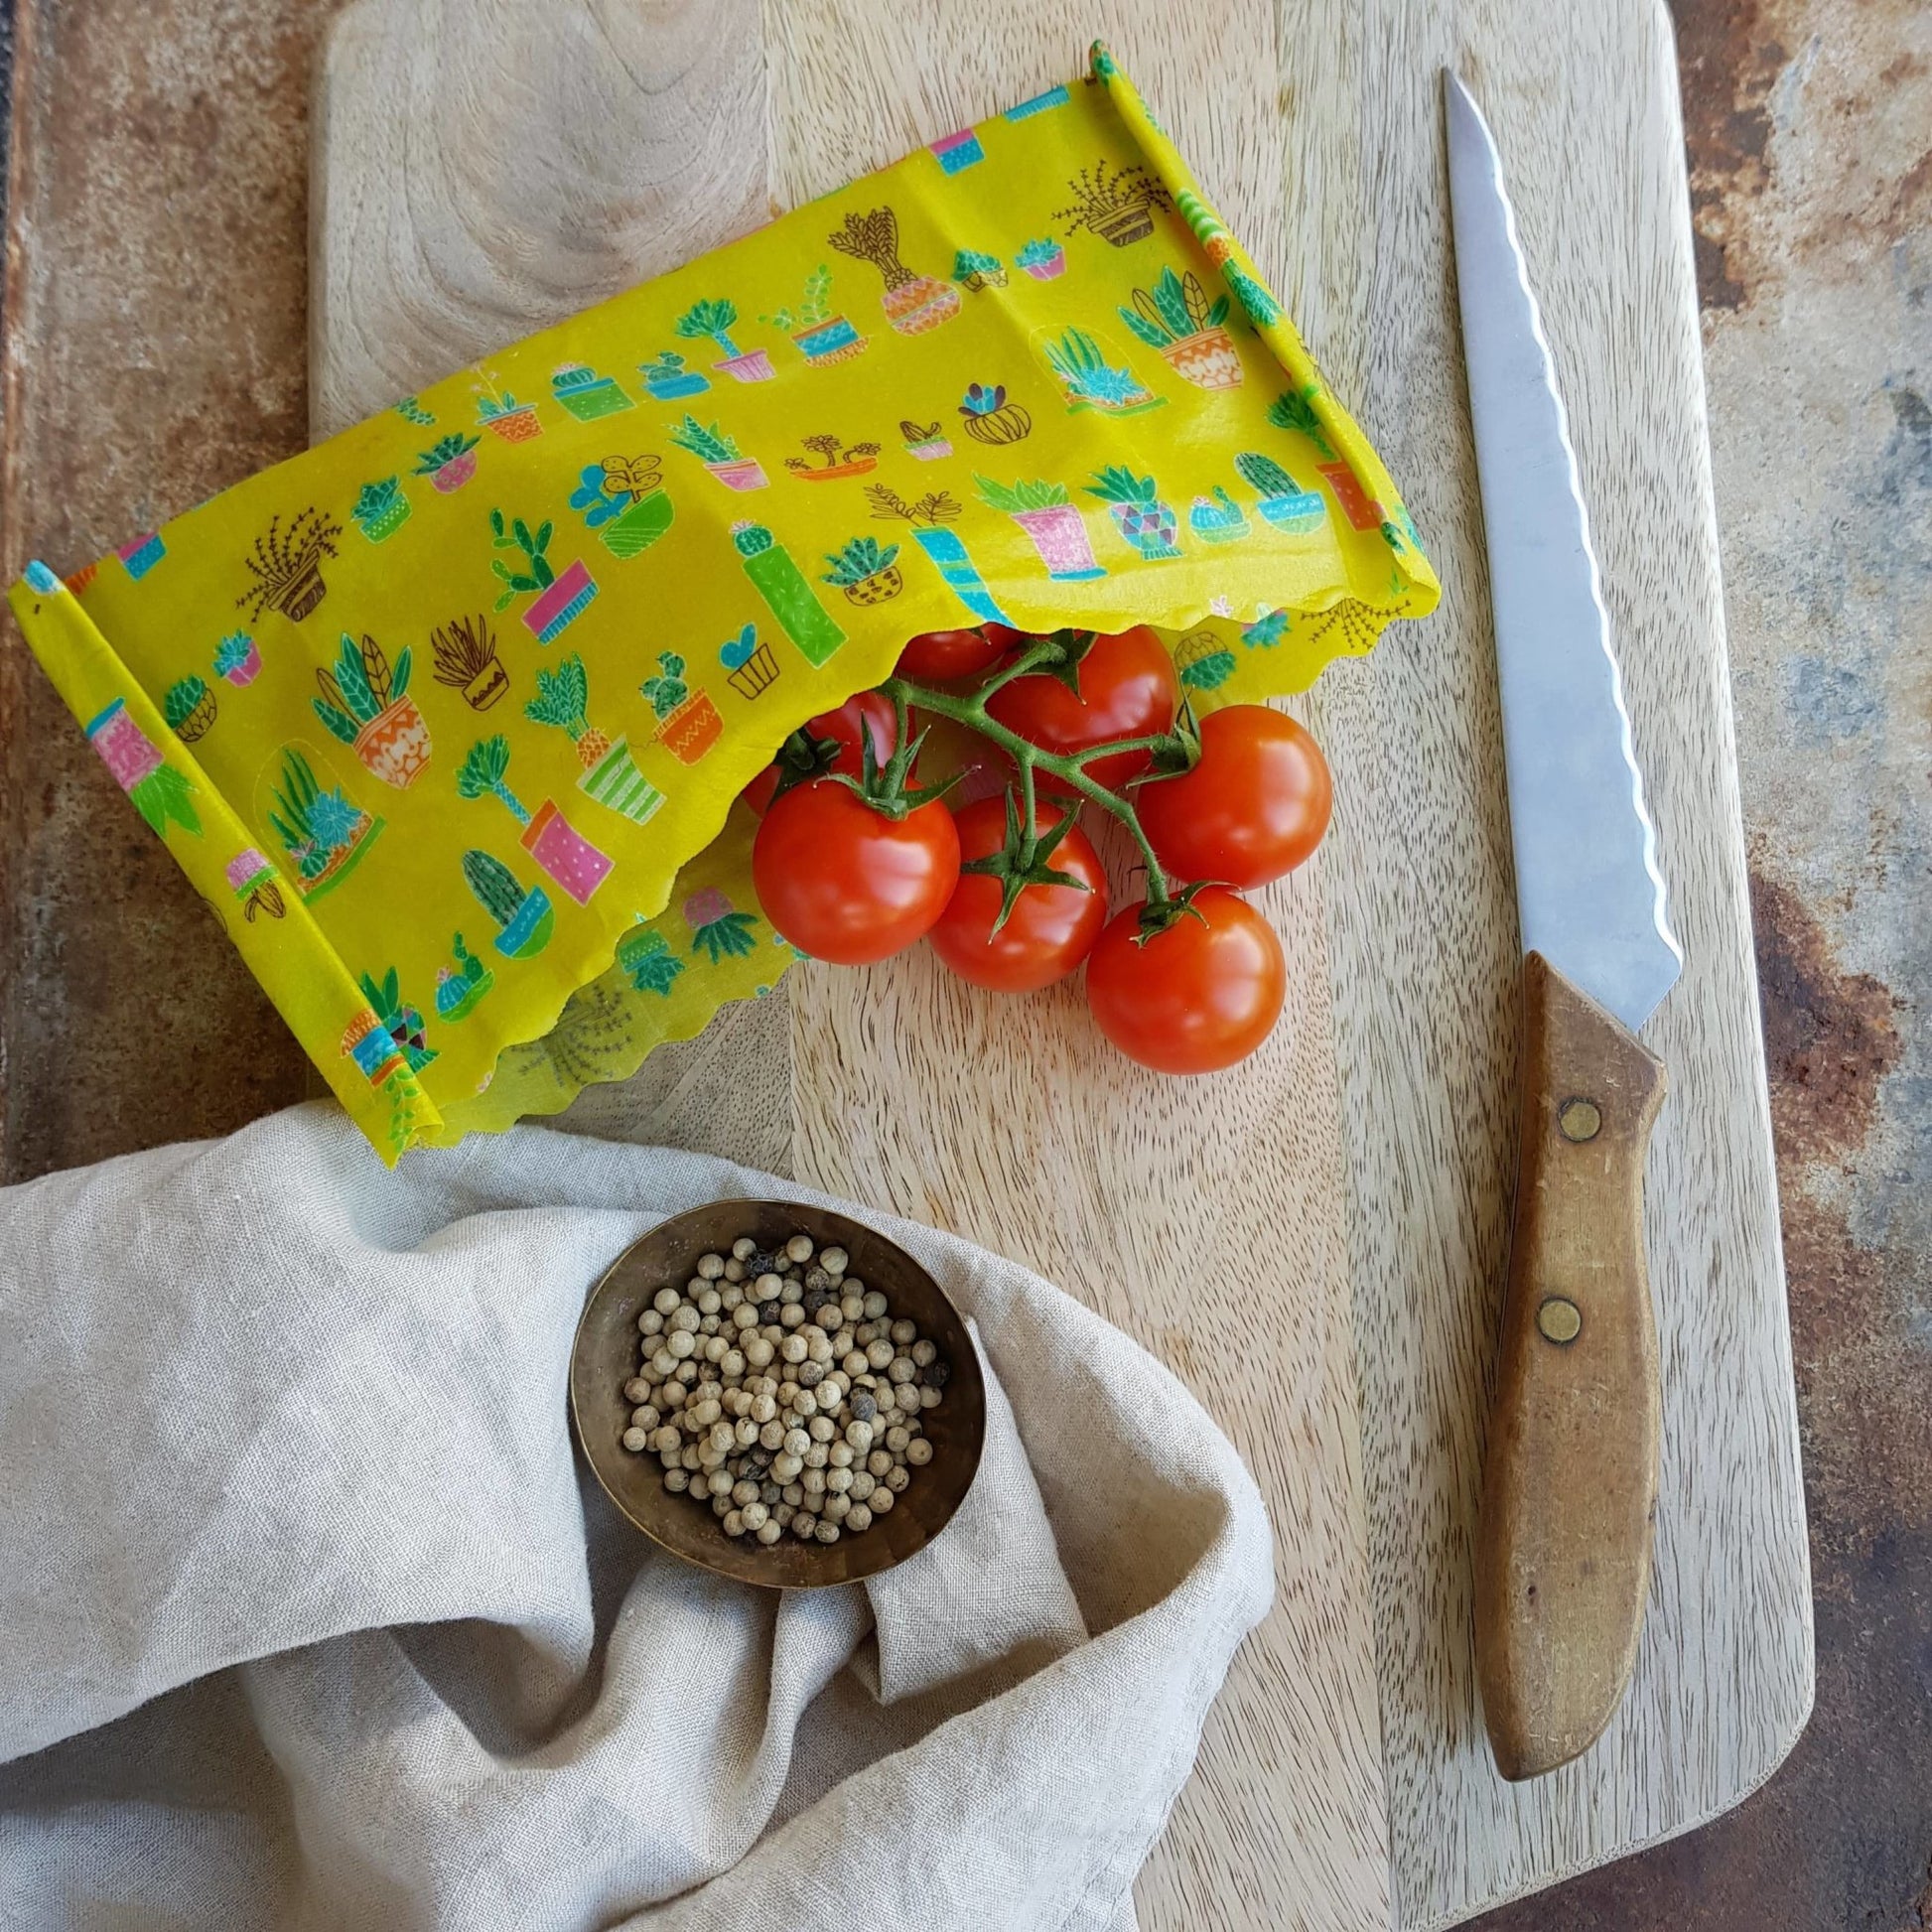 Big Starter Pack (Mid-sized set) – 3 beeswax wraps ideal for lunches, herbs, cheeses & pouches for spinach - Little Bumble Reusable Food Wraps